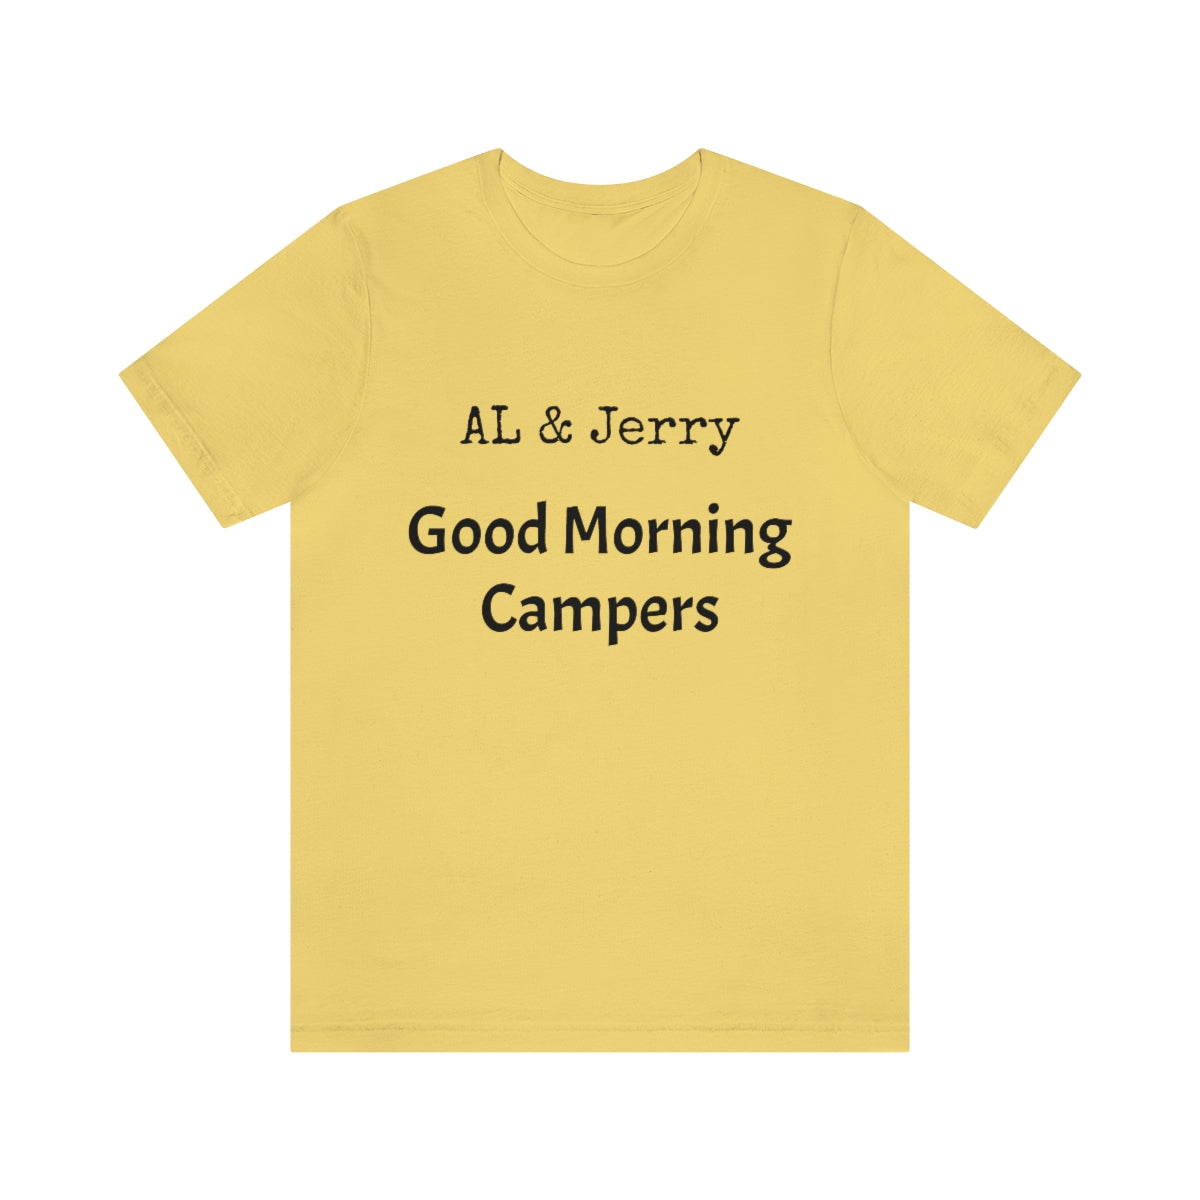 Al & Jerry "Good Morning Campers" Tee Shirt